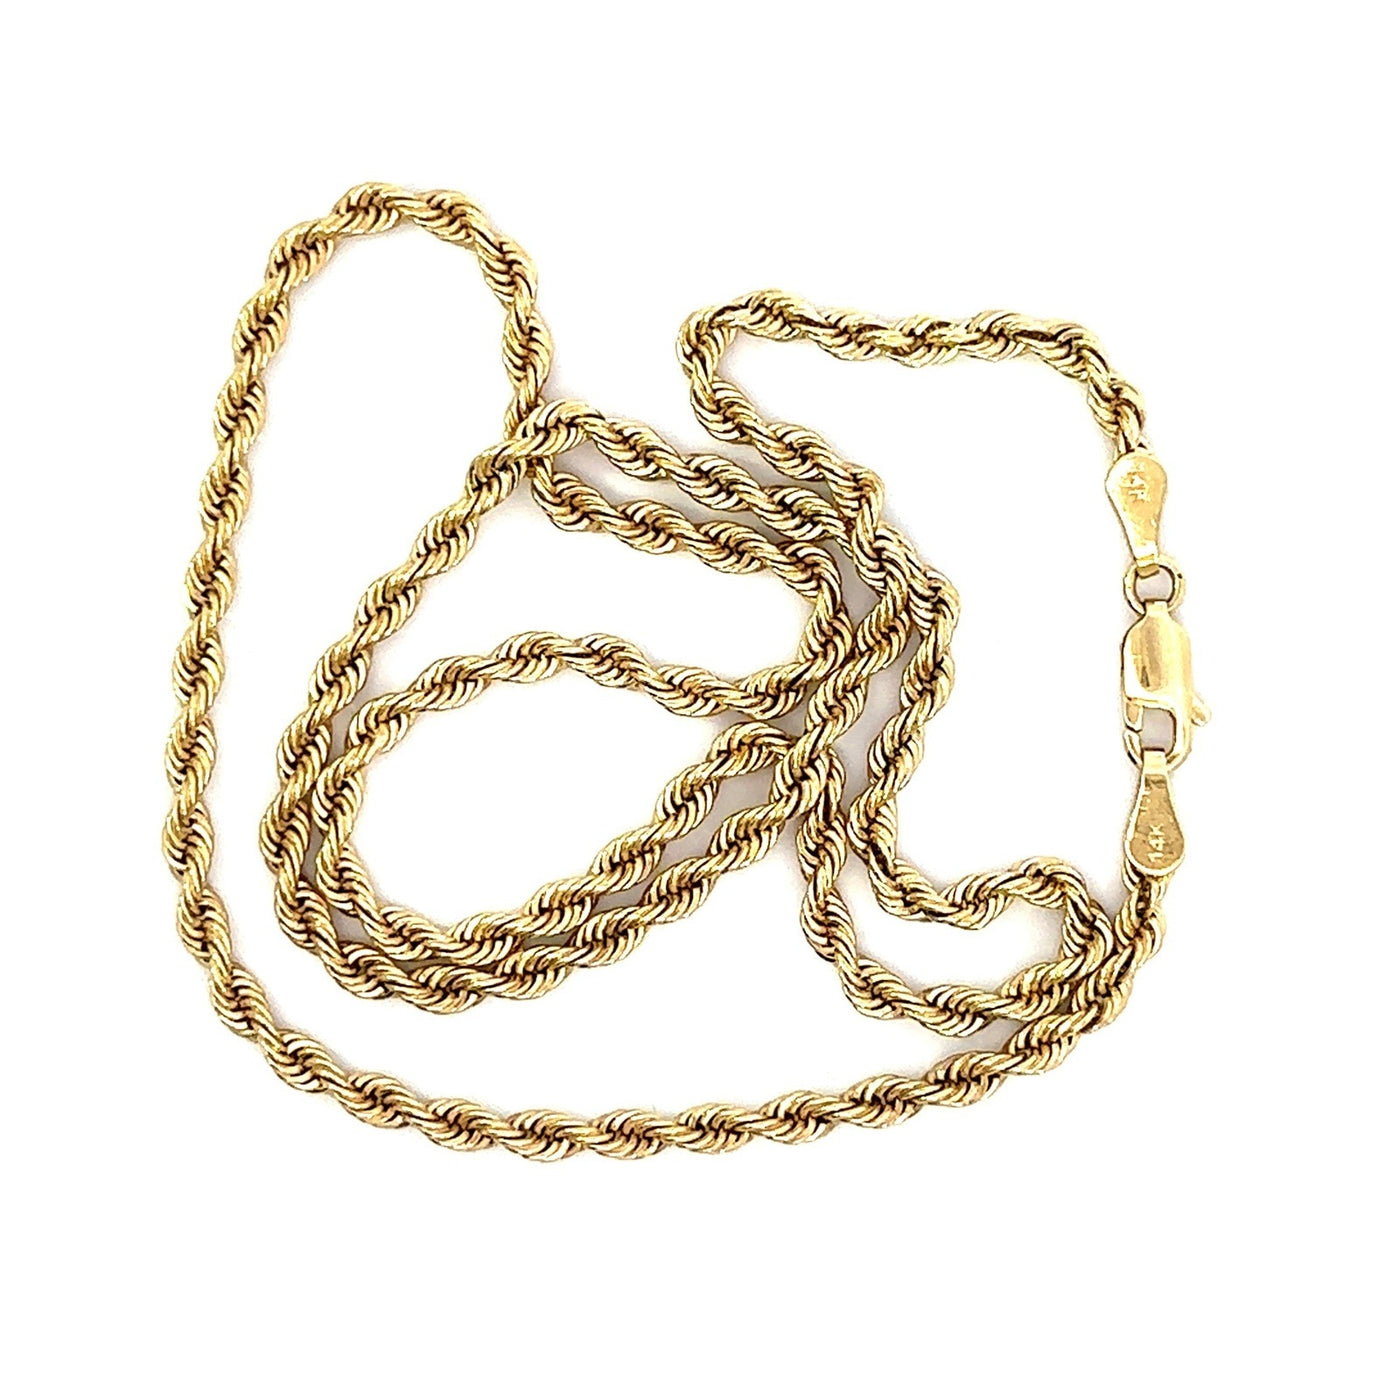 Vintage Rope Chain no. 4